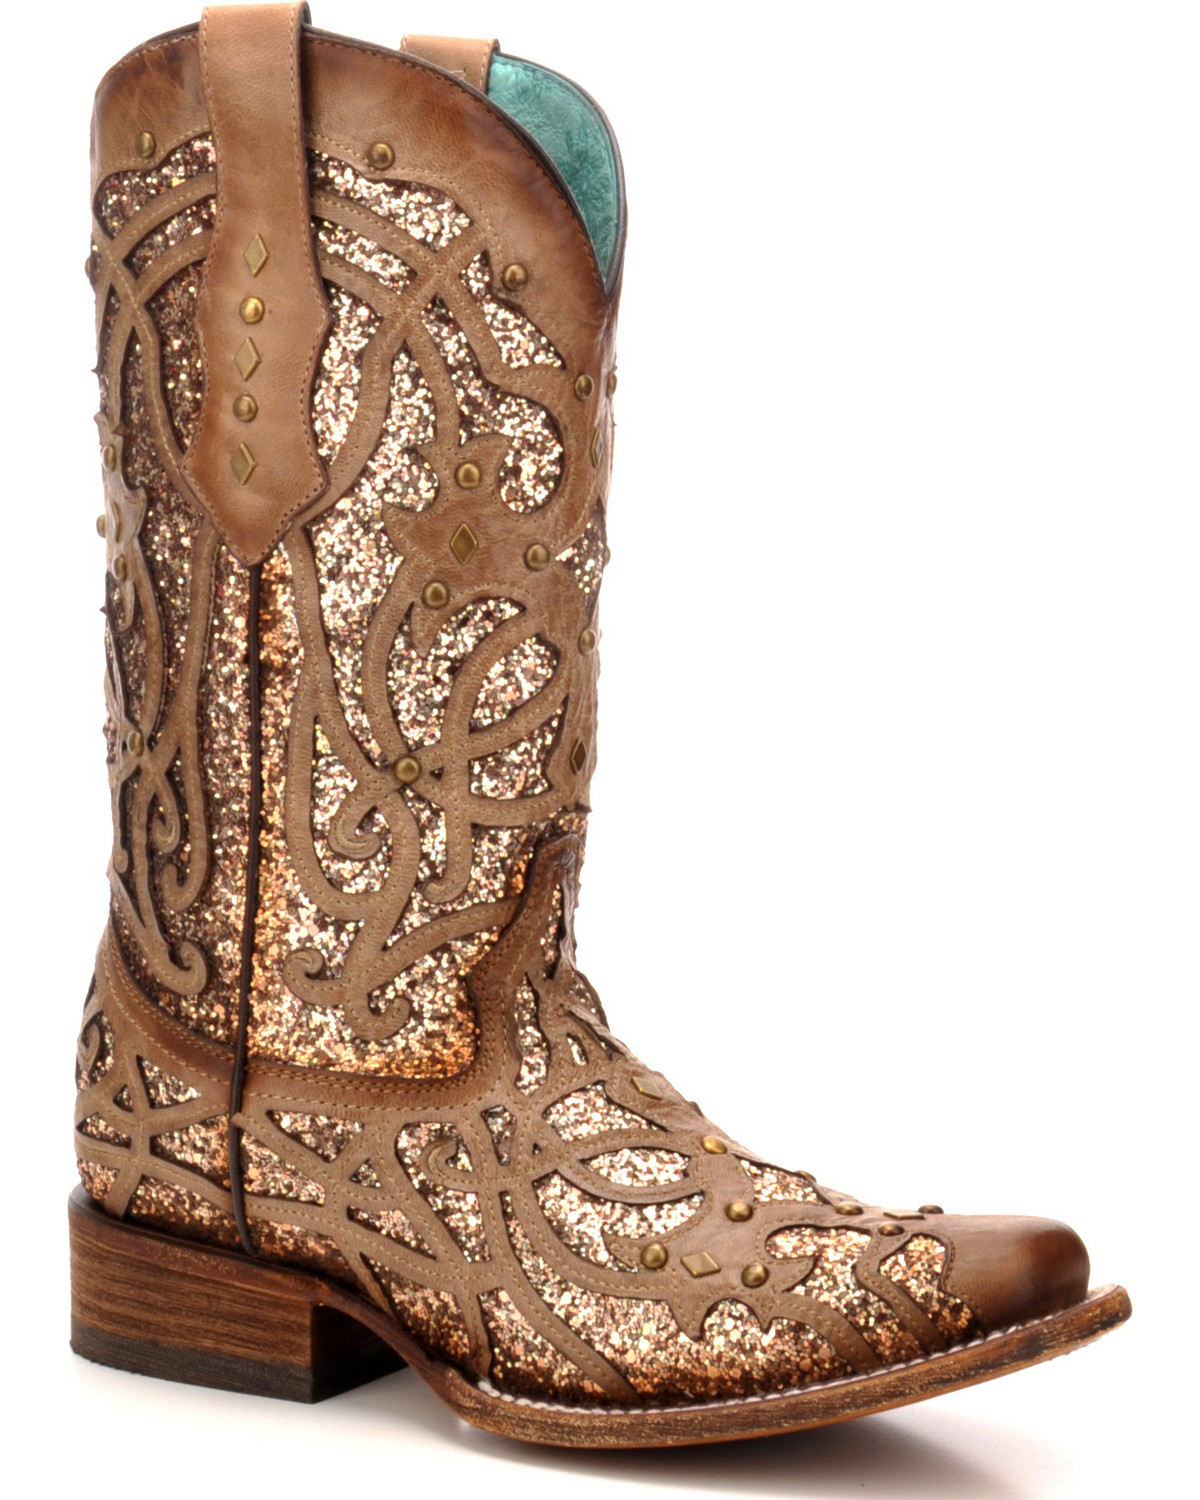 Corral Women's Orix Glitter Inlay & Studded Western Boots - Square Toe